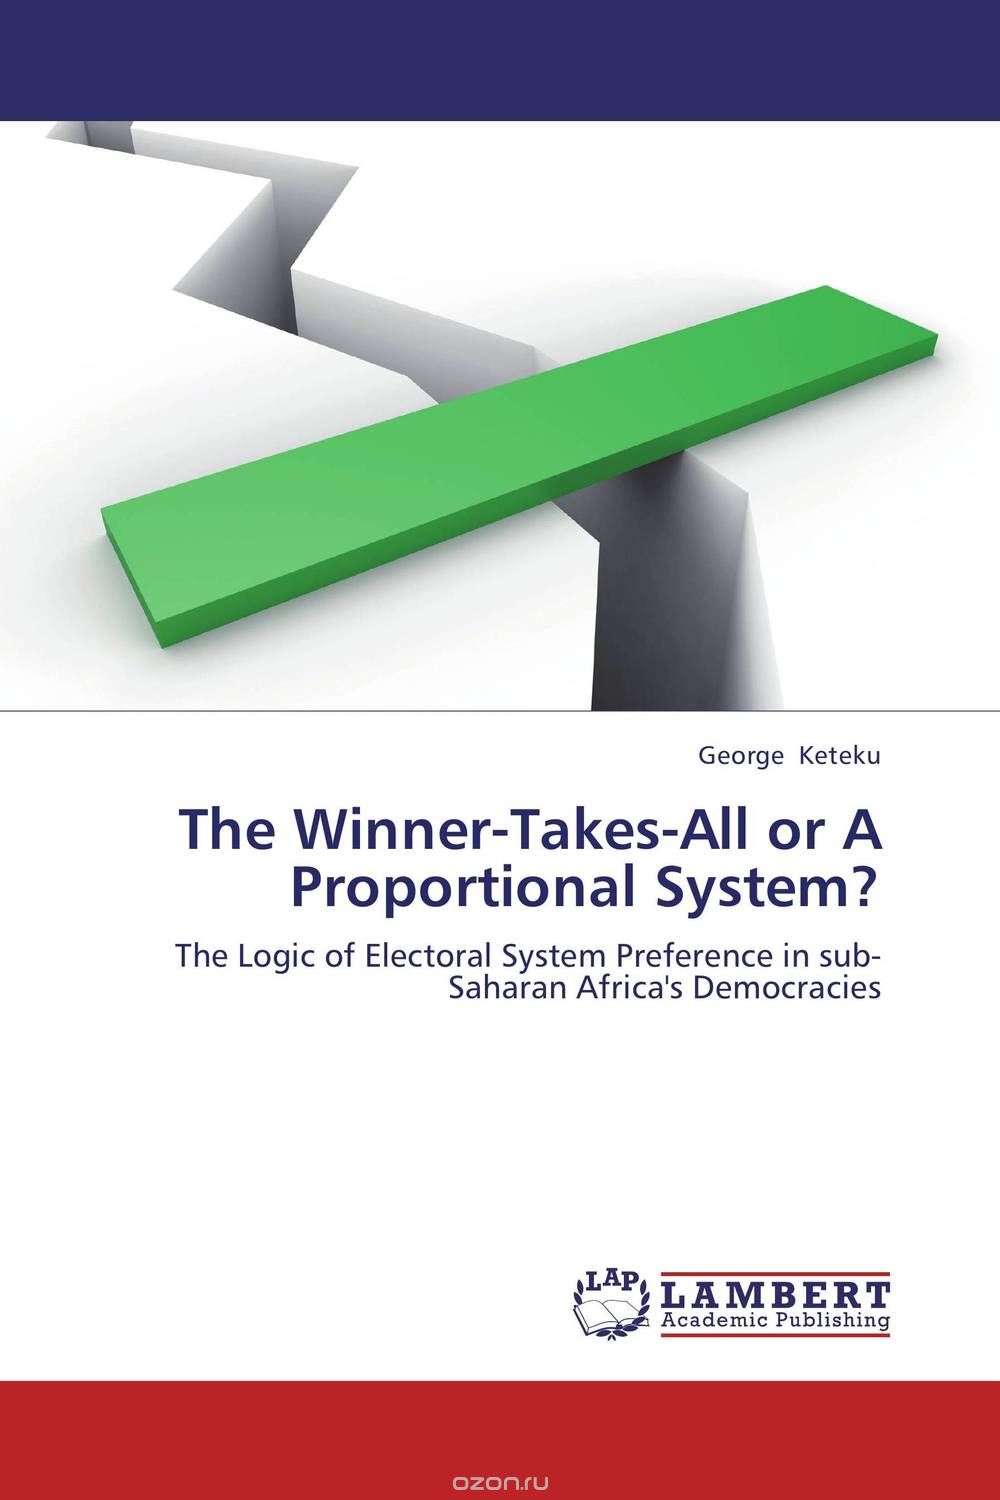 Скачать книгу "The Winner-Takes-All or A Proportional System?"